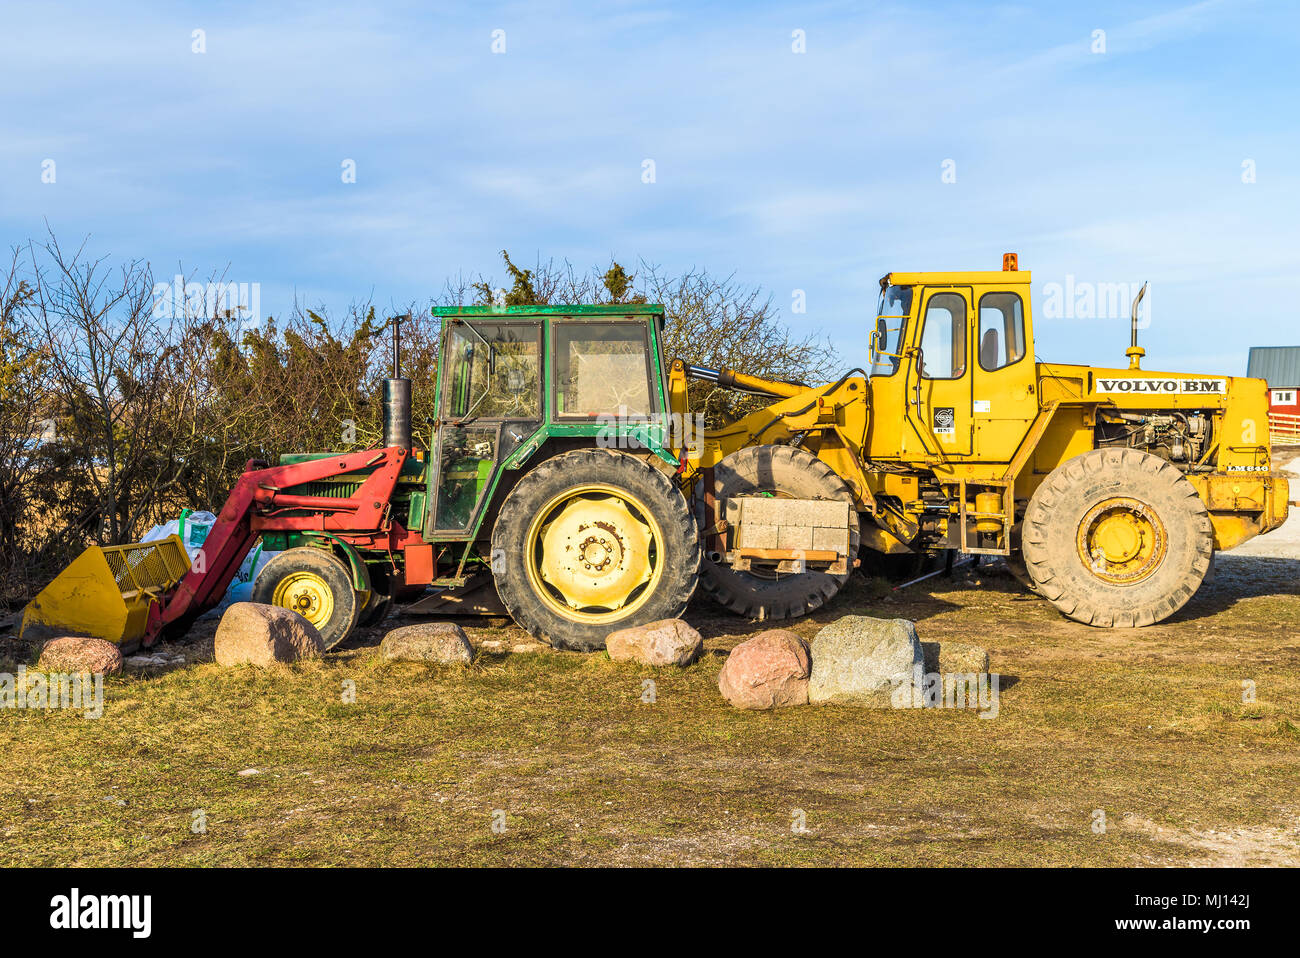 Gillberga, Oland, Sweden - April 7, 2018: Travel documentary of everyday life and environment. Two tractors parked beside the road, a green John Deere Stock Photo